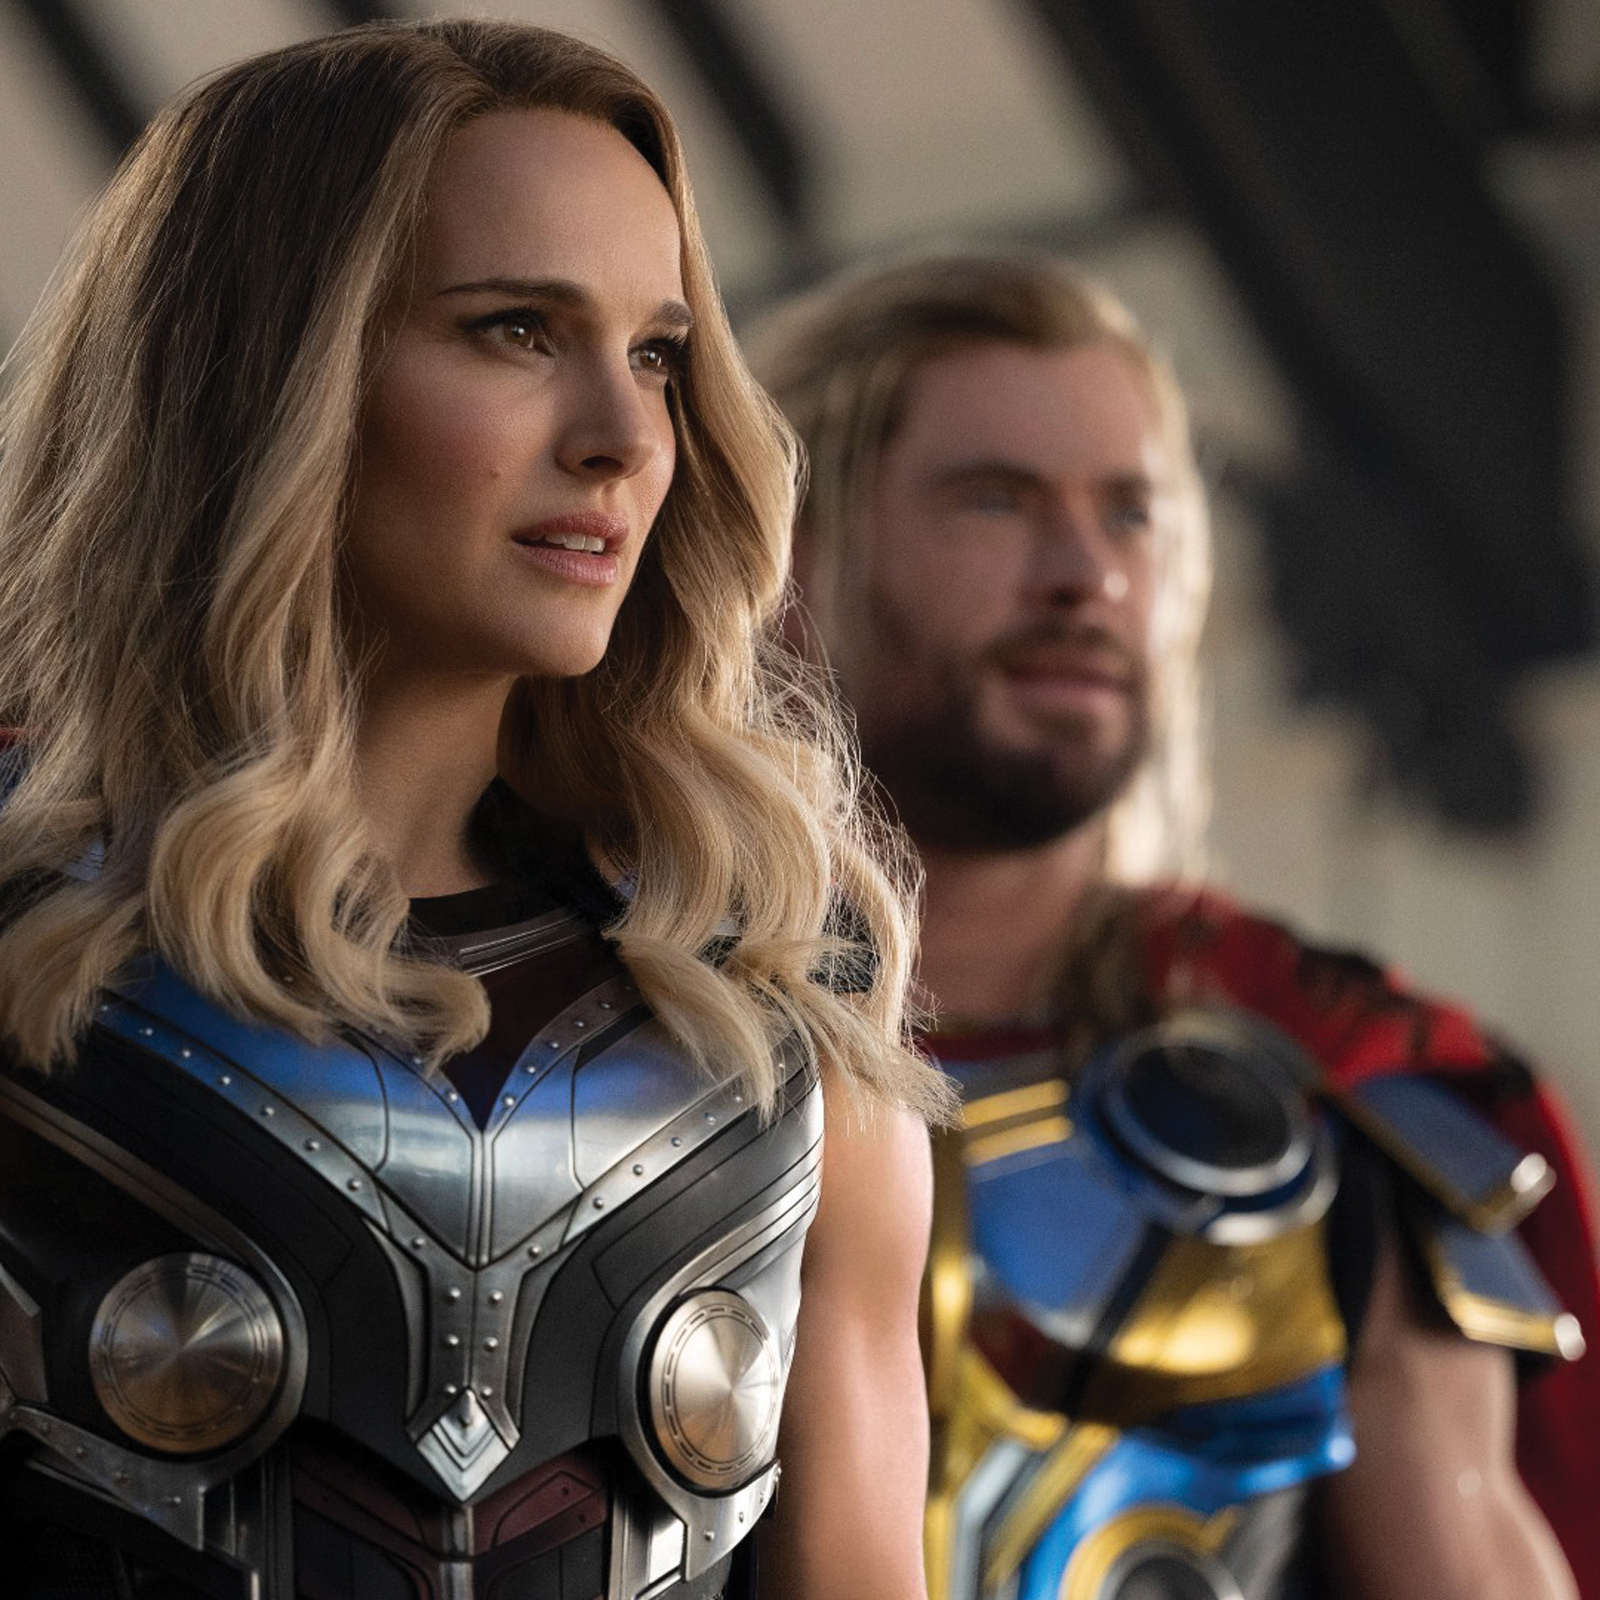 A New Chapter Of “Thor: Love and Thunder”